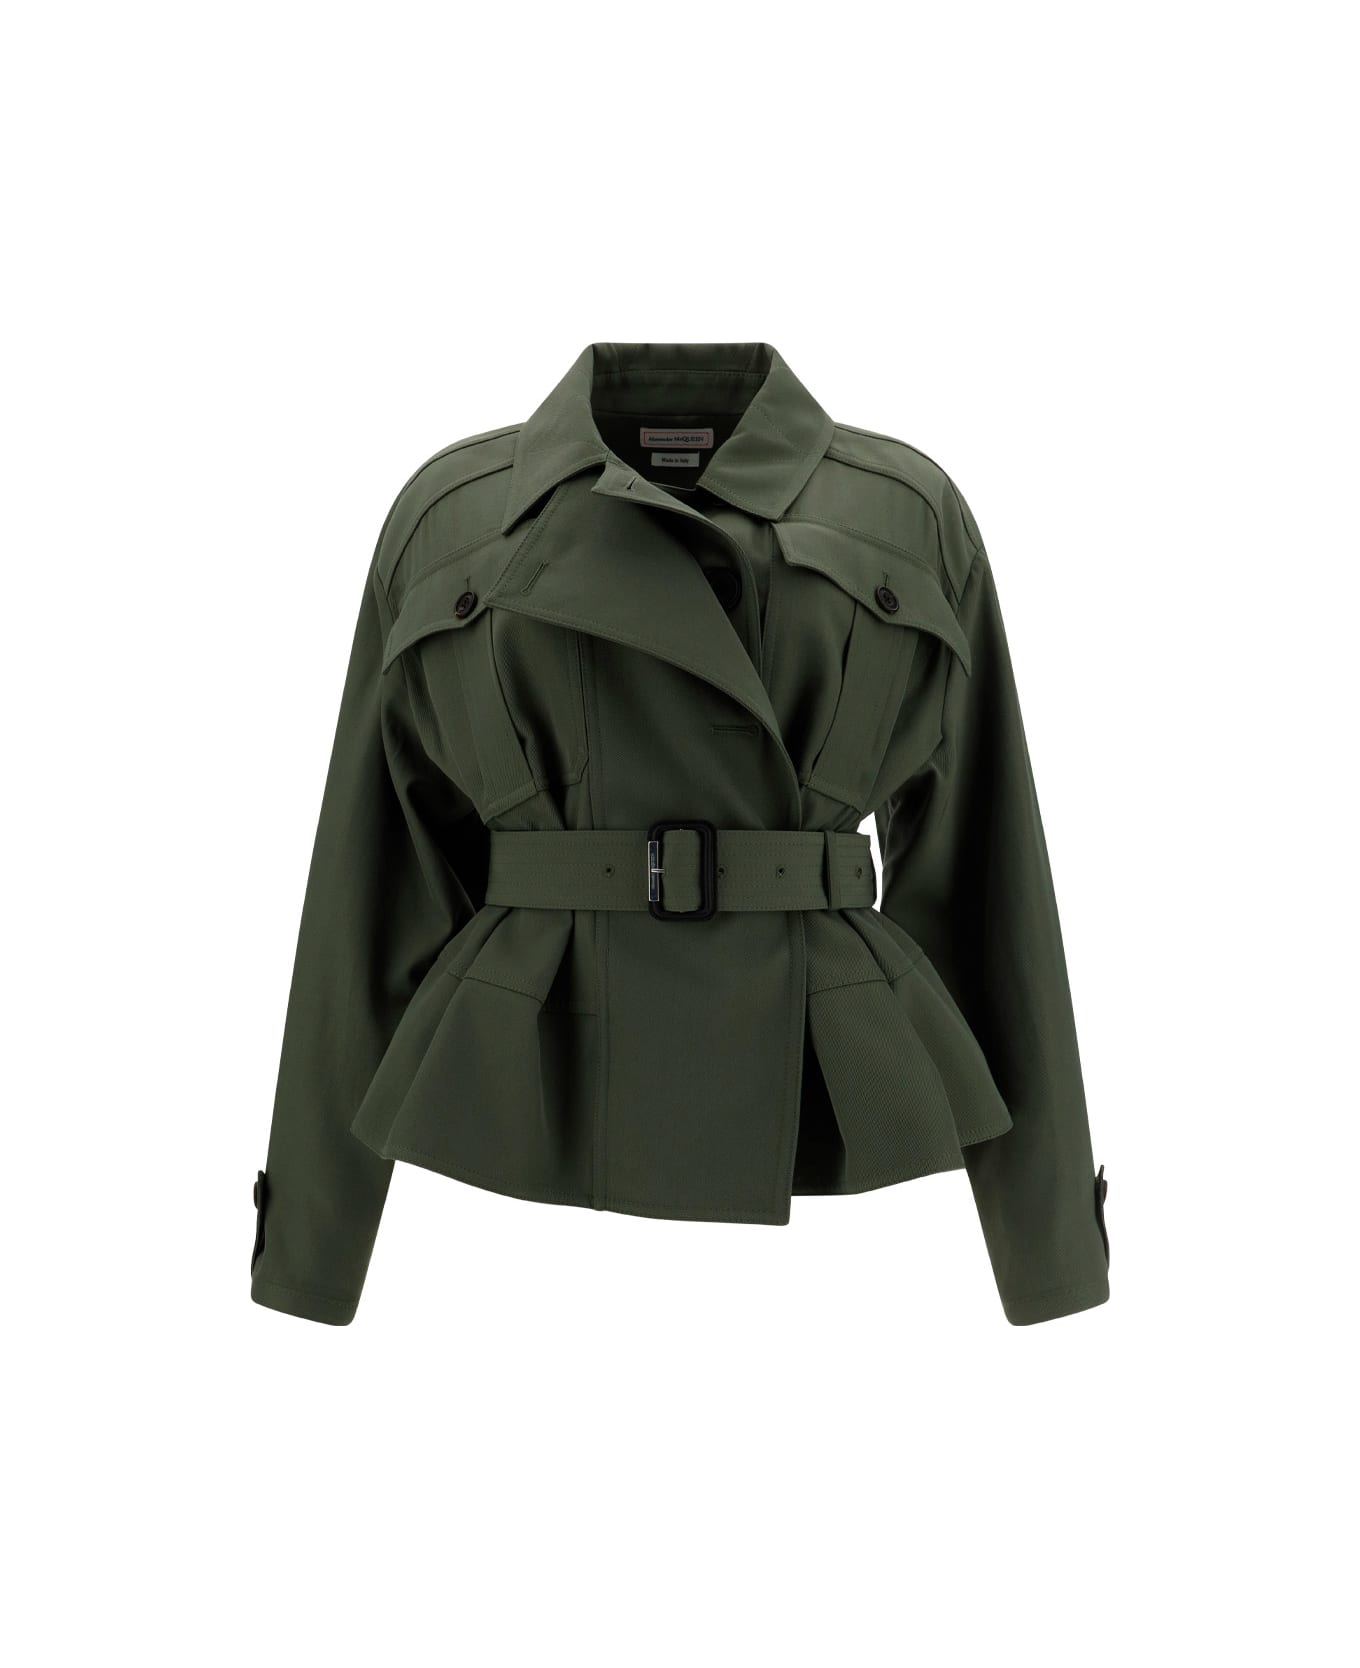 Alexander McQueen Military Jacket With Ruffles - Military Green